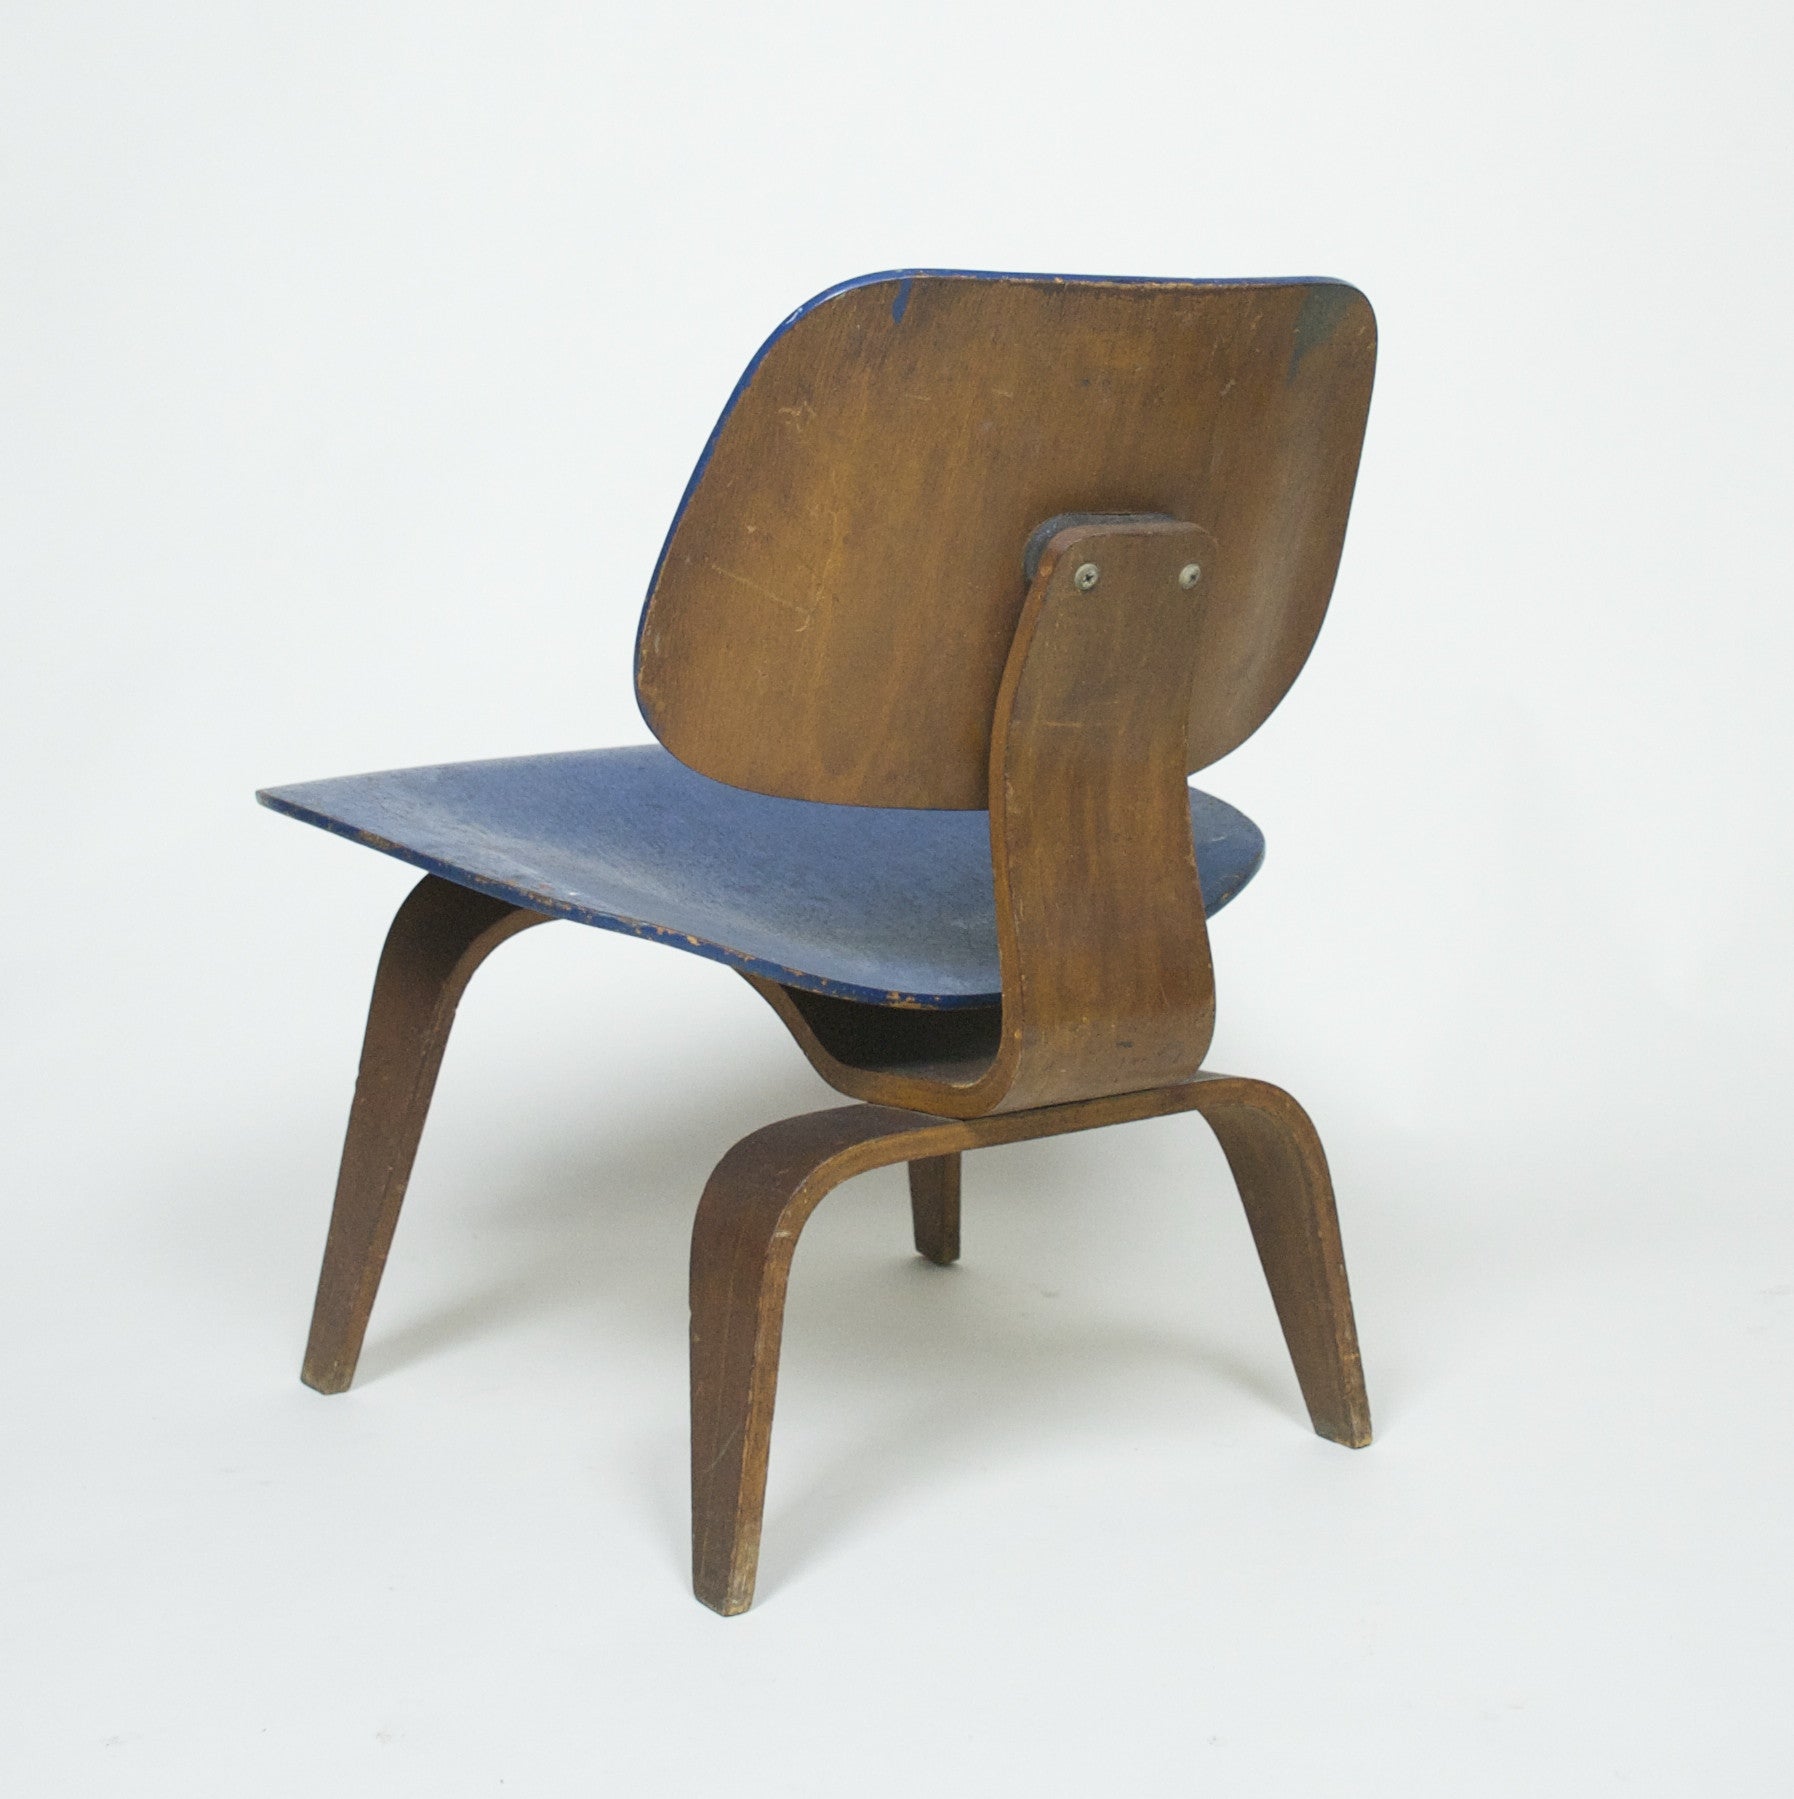 SOLD Eames Evans Herman Miller 1947 LCW Early Rare Chair, All Original Lounge Chair